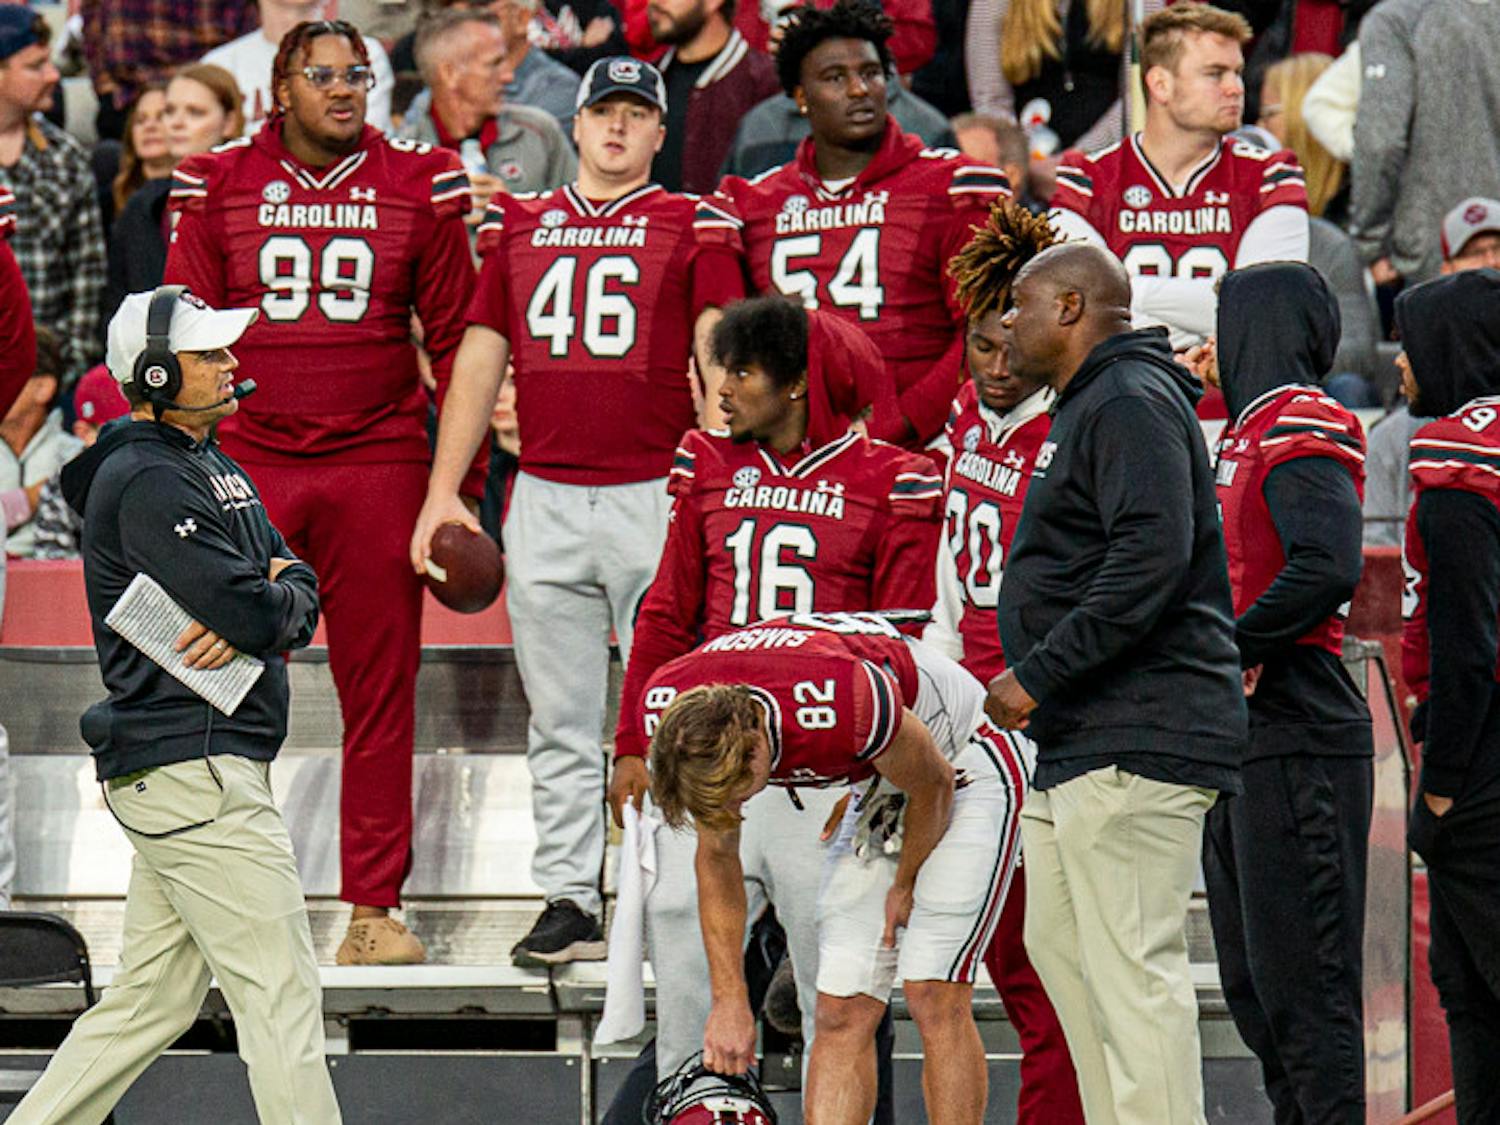 Junior wide receiver Corey Rucker (No.16) stands on the sidelines during the South Carolina's matchup with Missouri game on Oct. 29, 2022. Rucker sustained a foot injury during the South Carolina pre-season camp over the summer that will now require surgery and keep him on the sidelines for the rest of the season.